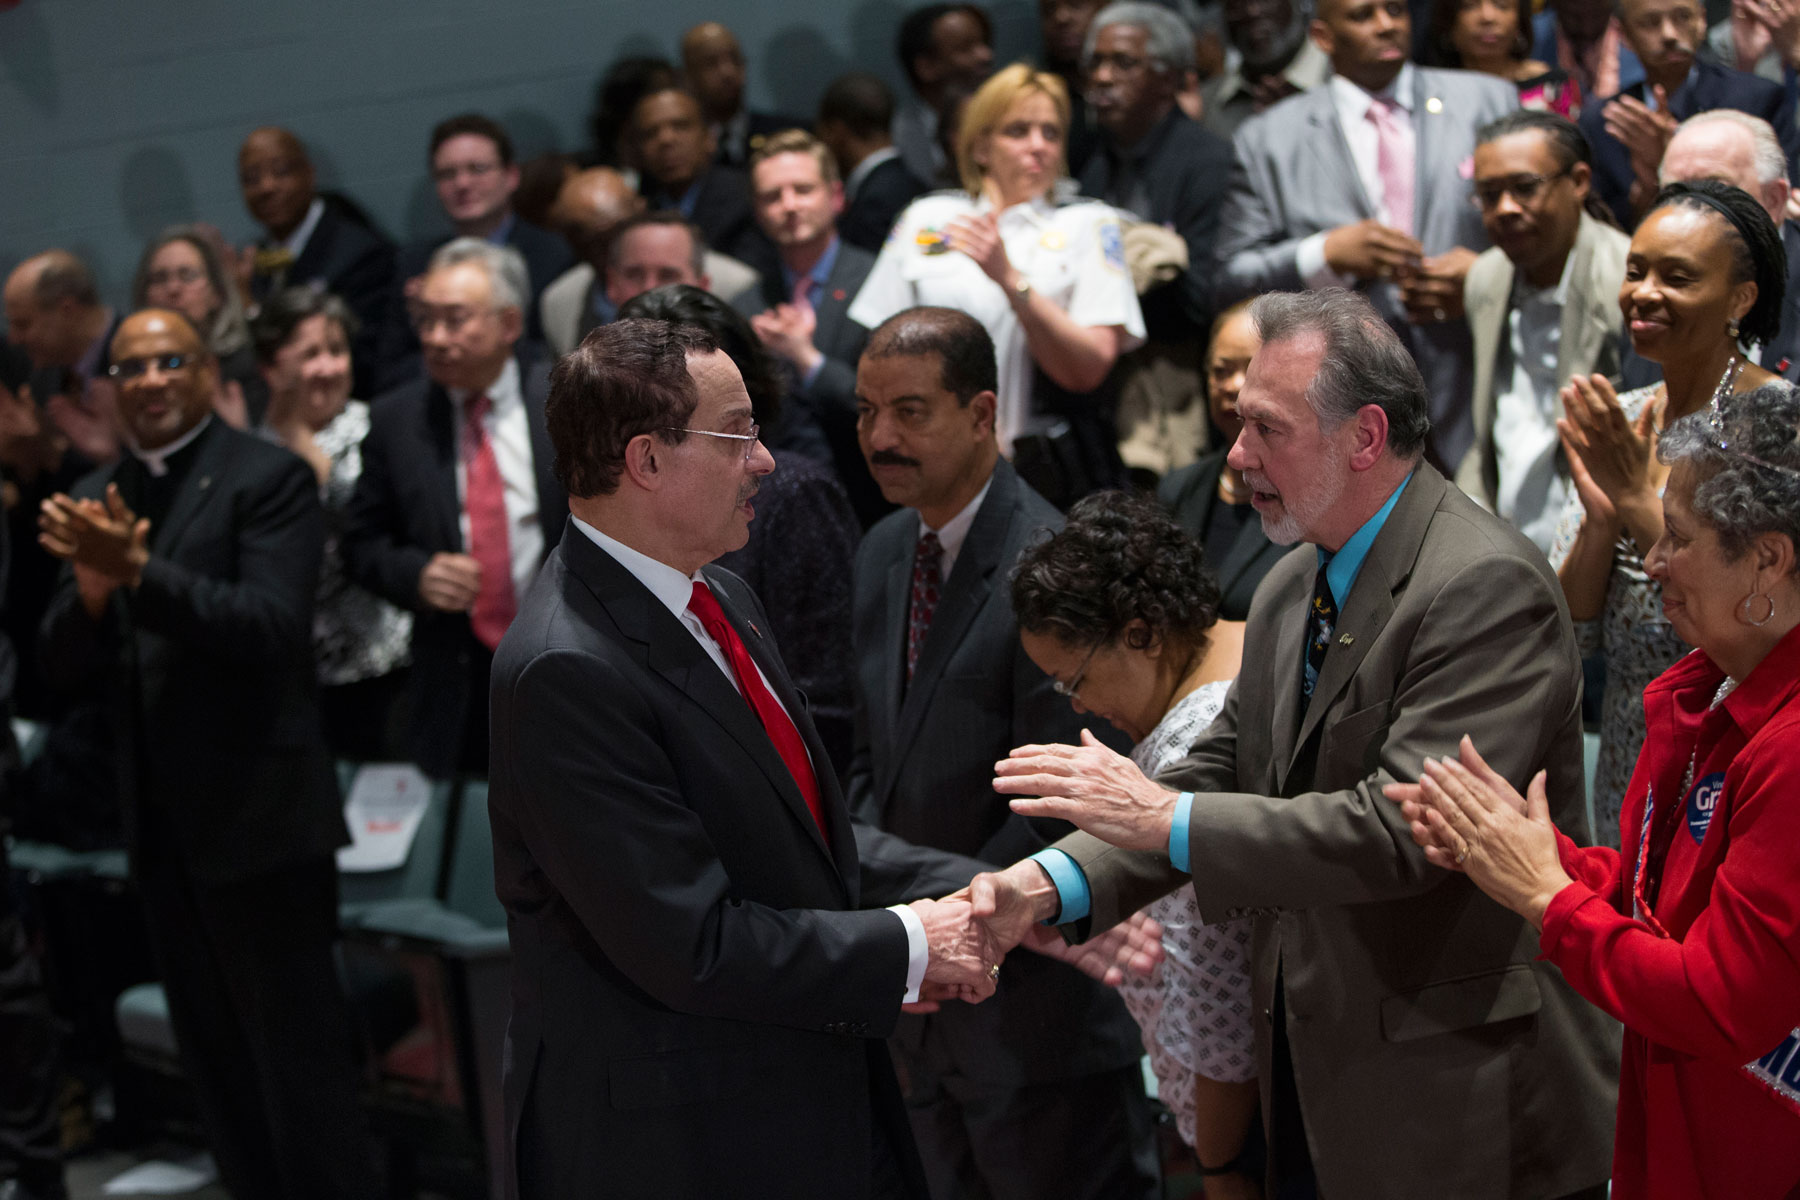 Despite scandal, DC mayor Gray makes pitch for 2nd term